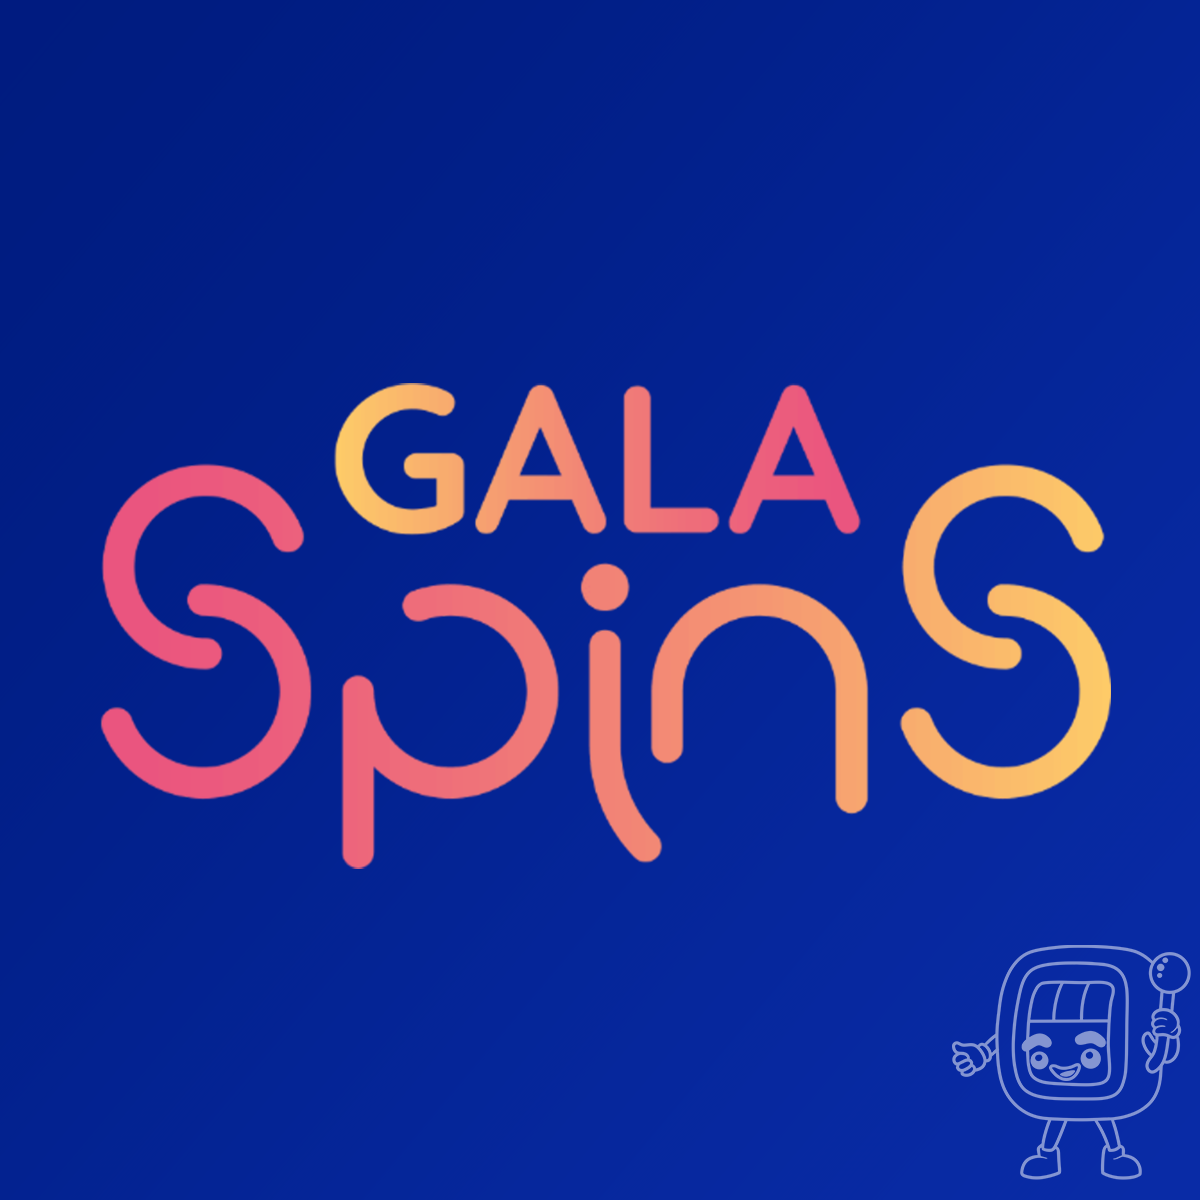 gala spins casino review